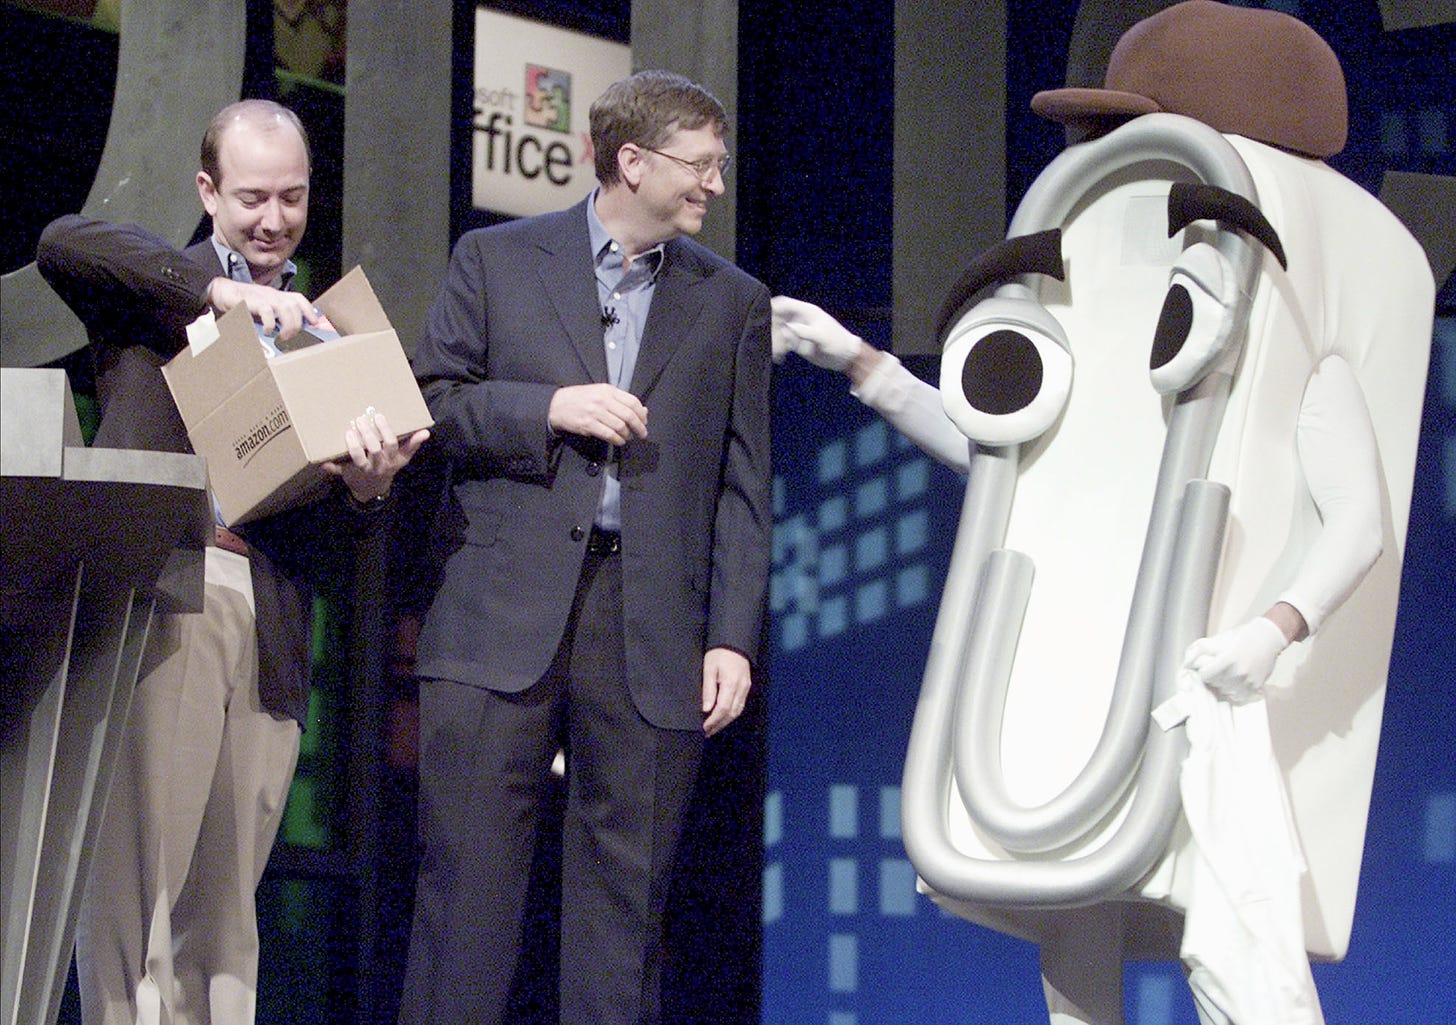 Photo on stage of Jeff Bezos opening an AMazon box with Bill Gates interacting with a person dressed as Clippy.